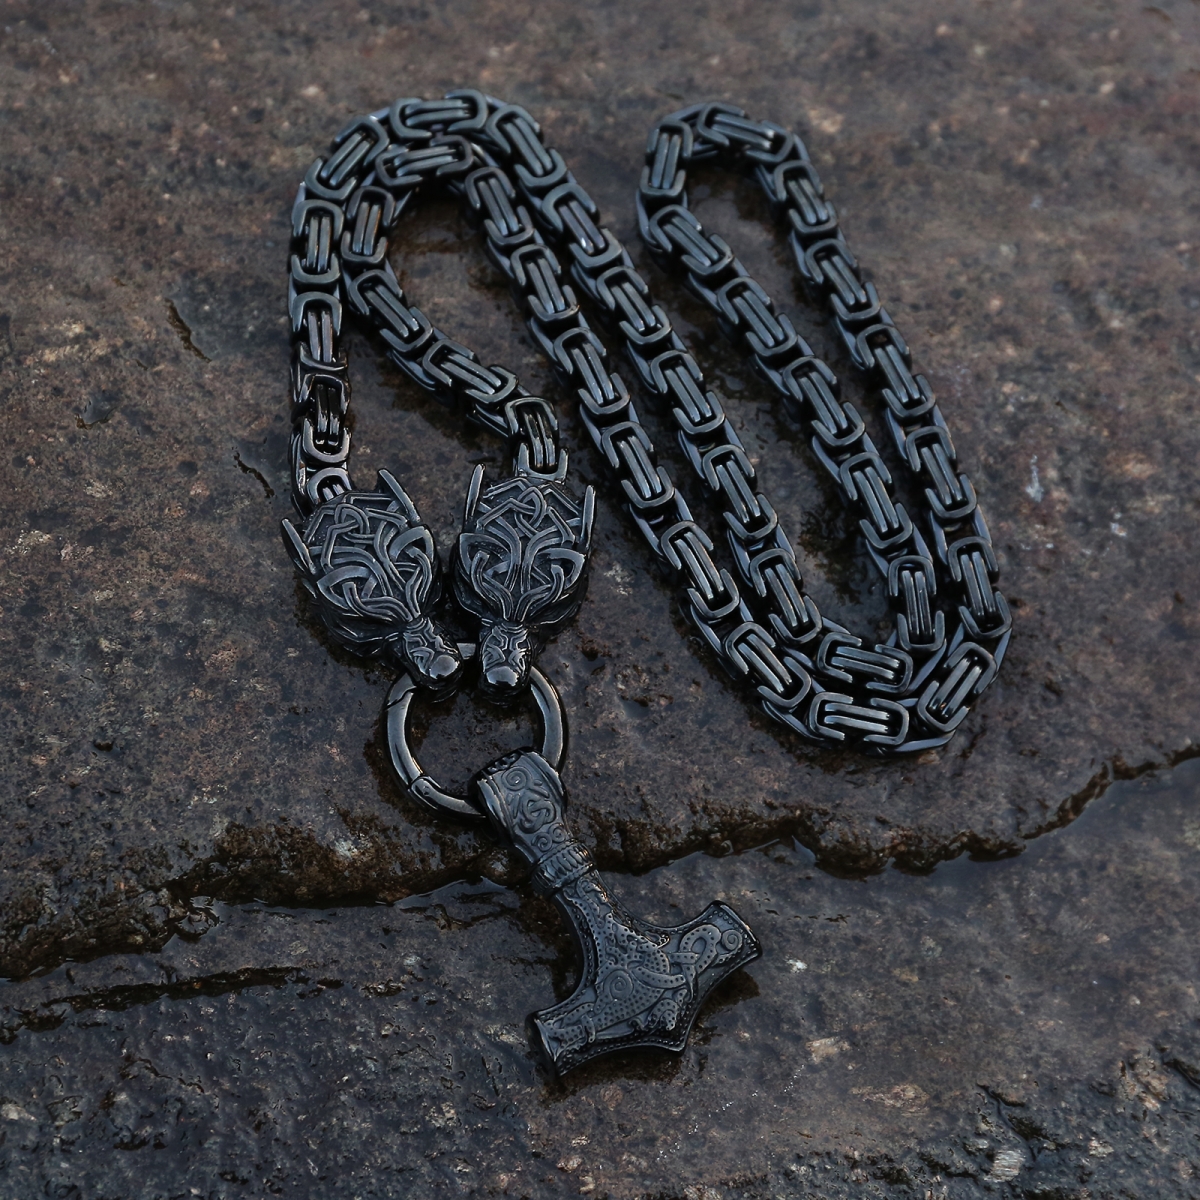 Wolf Hold Mjolnir Necklace King Chain US$12/PC-NORSECOLLECTION- Viking Jewelry,Viking Necklace,Viking Bracelet,Viking Rings,Viking Mugs,Viking Accessories,Viking Crafts